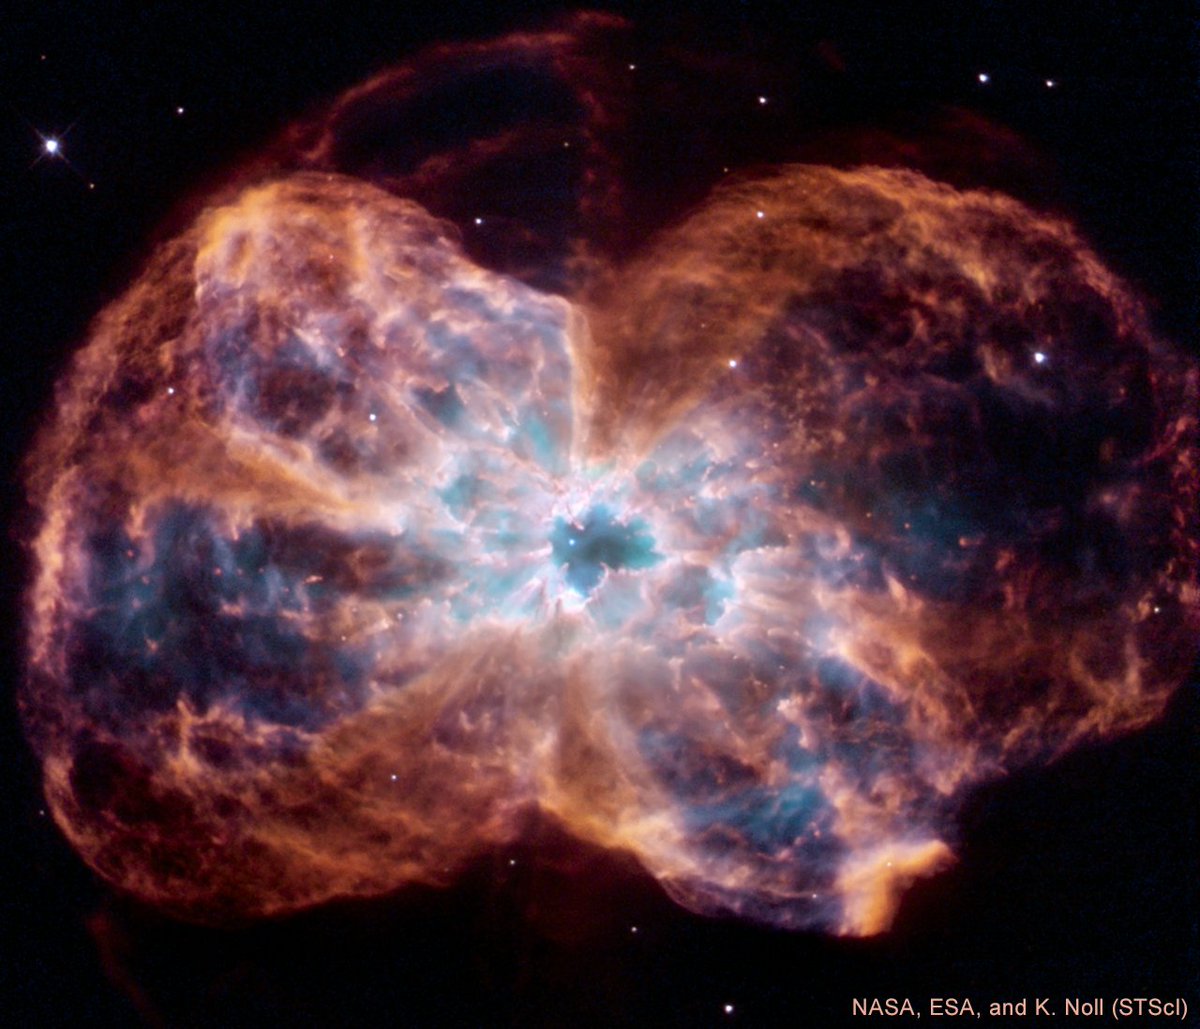 Today Chandra is studying NGC 2440, a dying star that's providing a spectacular final performance. The white dwarf star at the heart of this planetary nebula is one of the hottest known, with a surface temperature of nearly 222,000 degrees Celsius (400,000 degrees Fahrenheit).